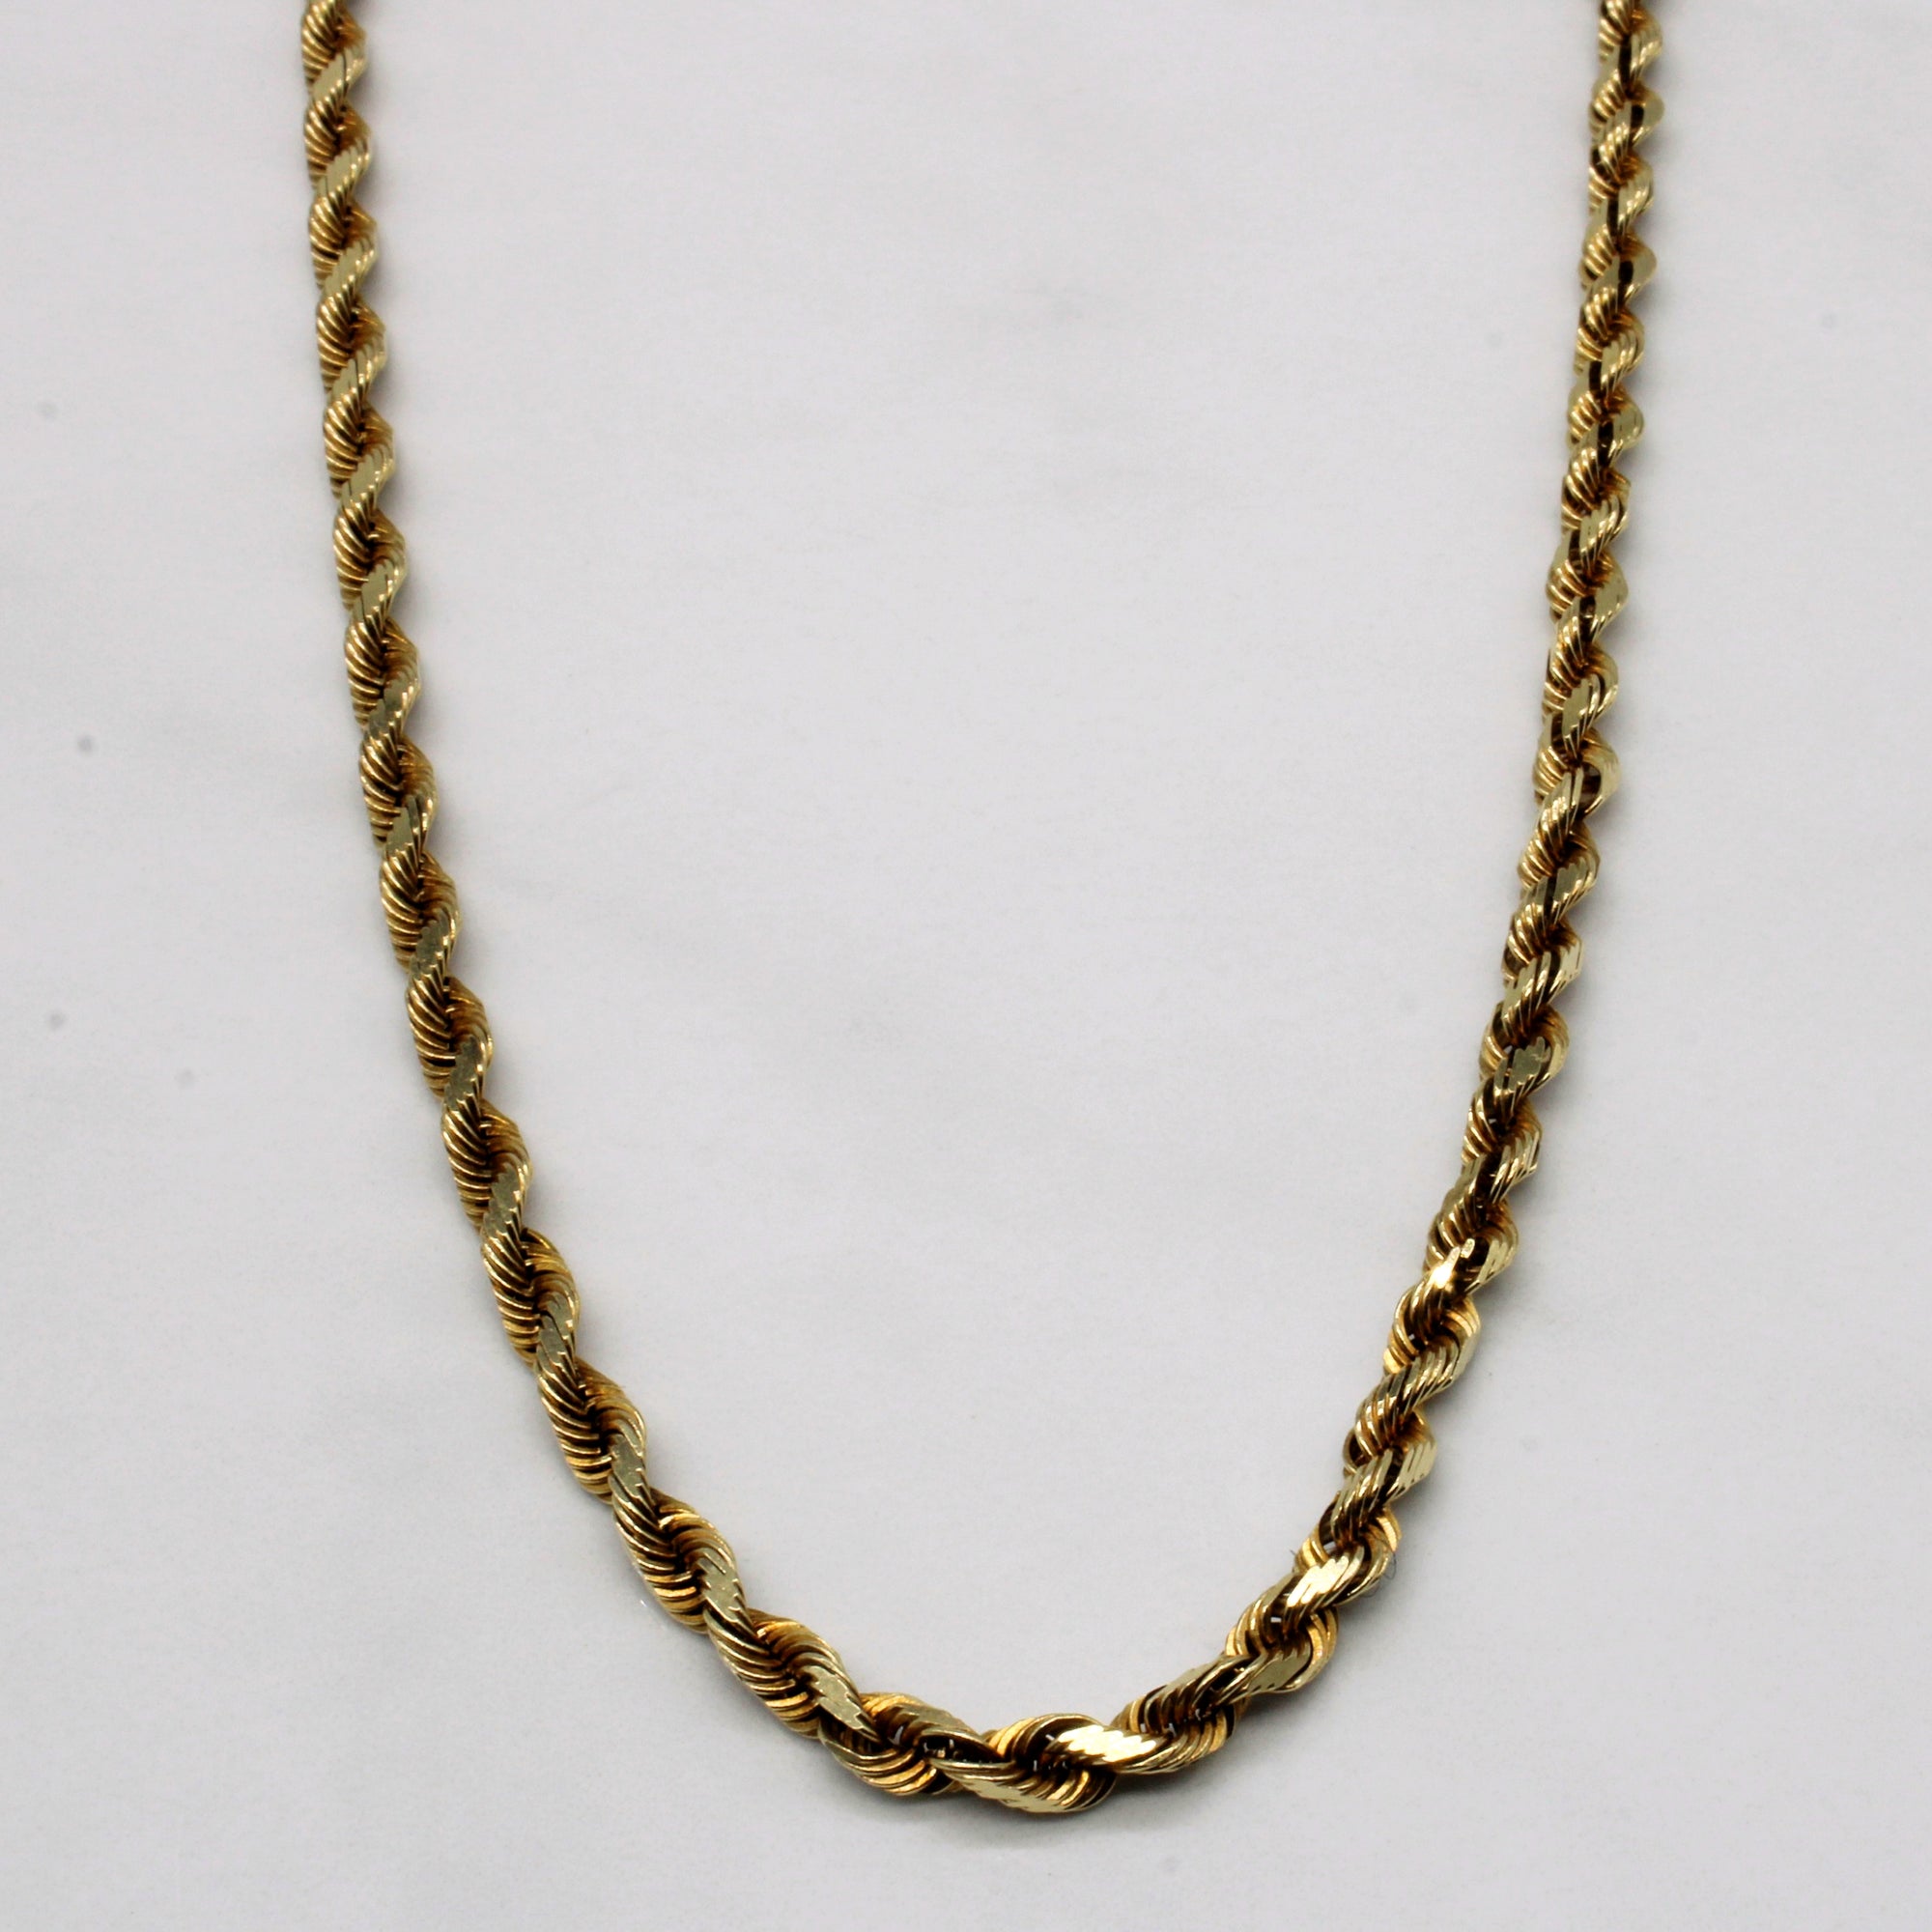 016 Gauge Rope Chain Choker Necklace in 10K Gold - 16